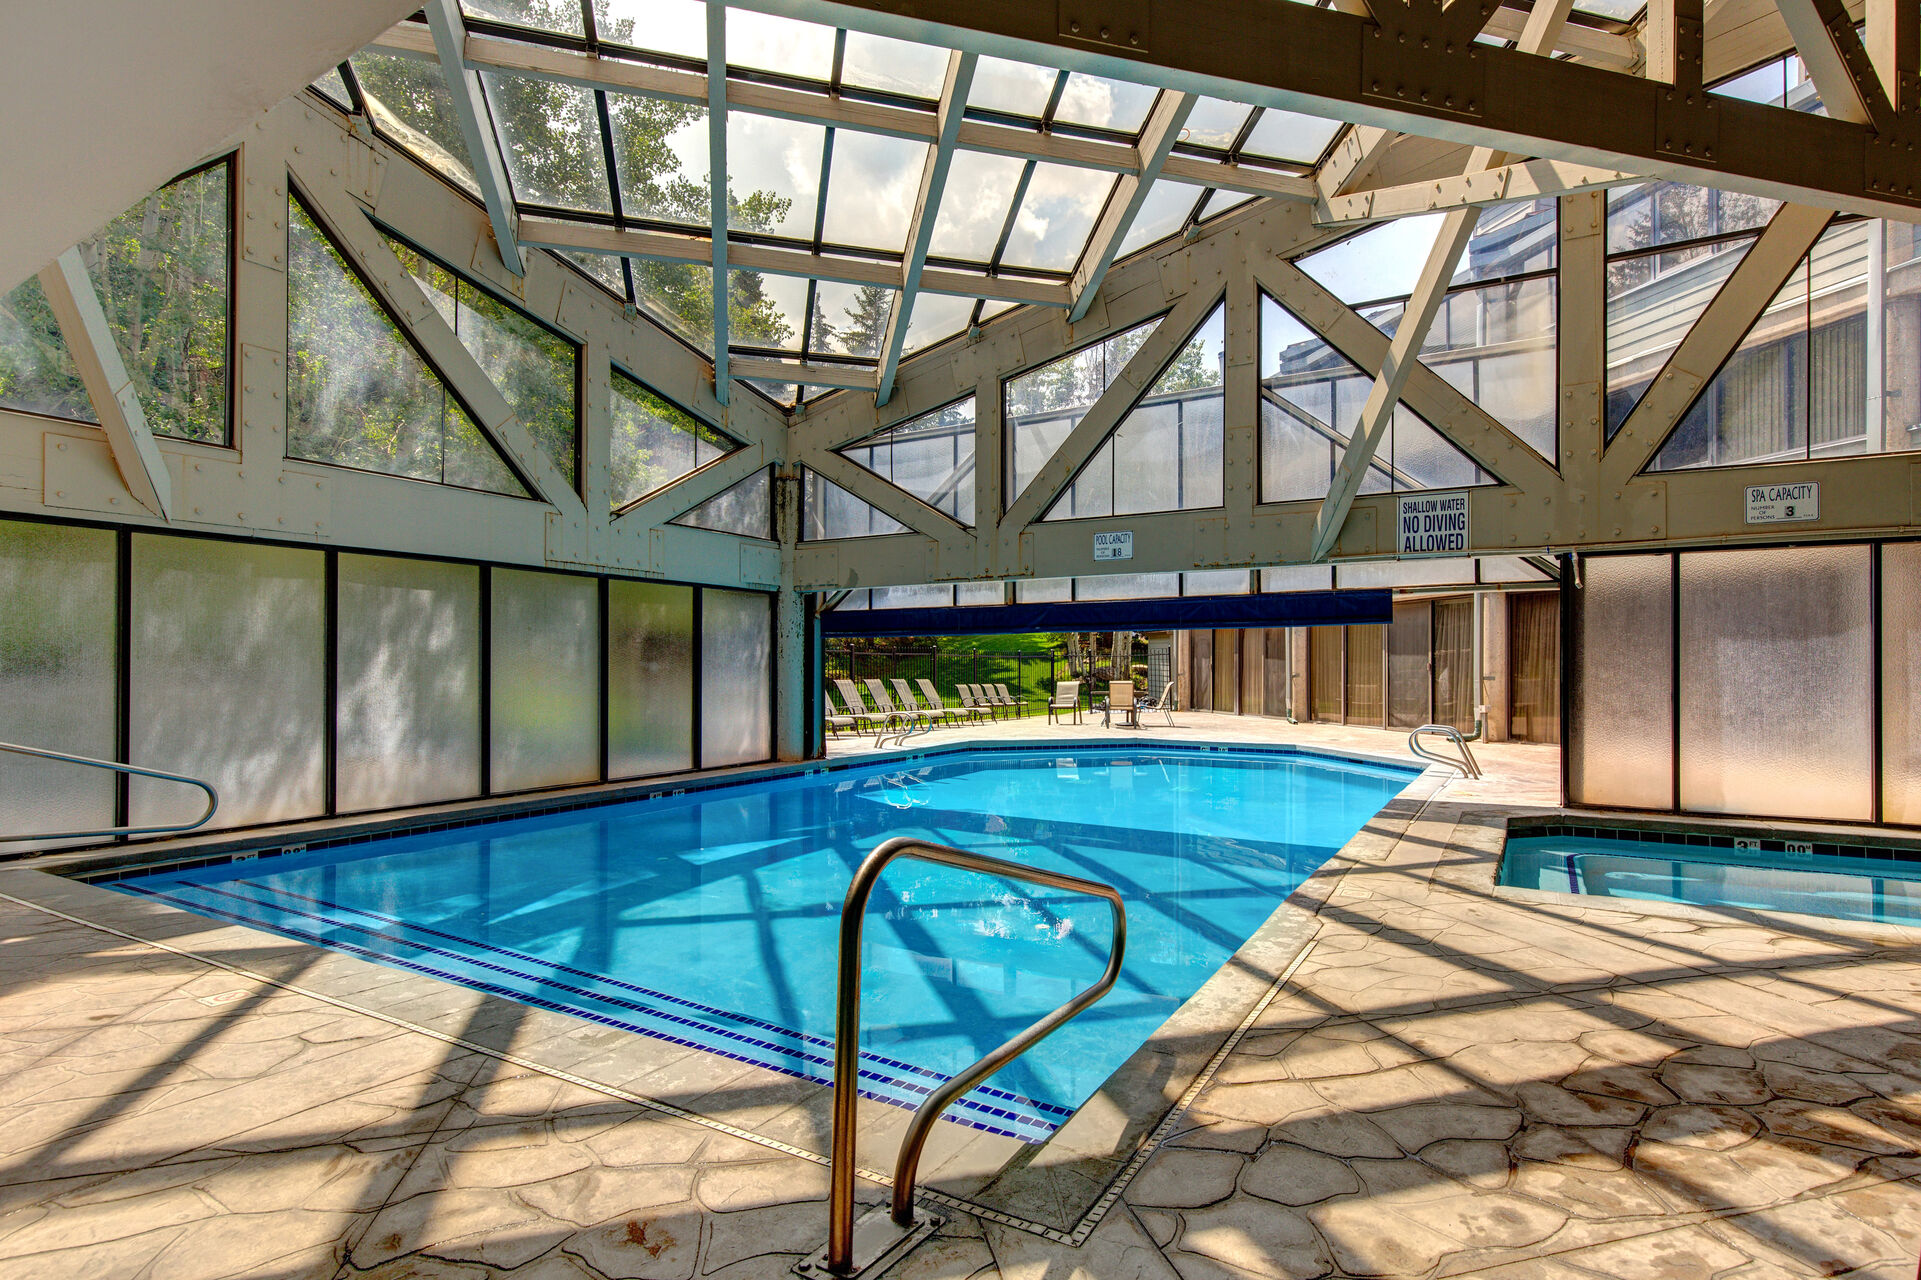 Communal Indoor/Outdoor Pool and hot tub